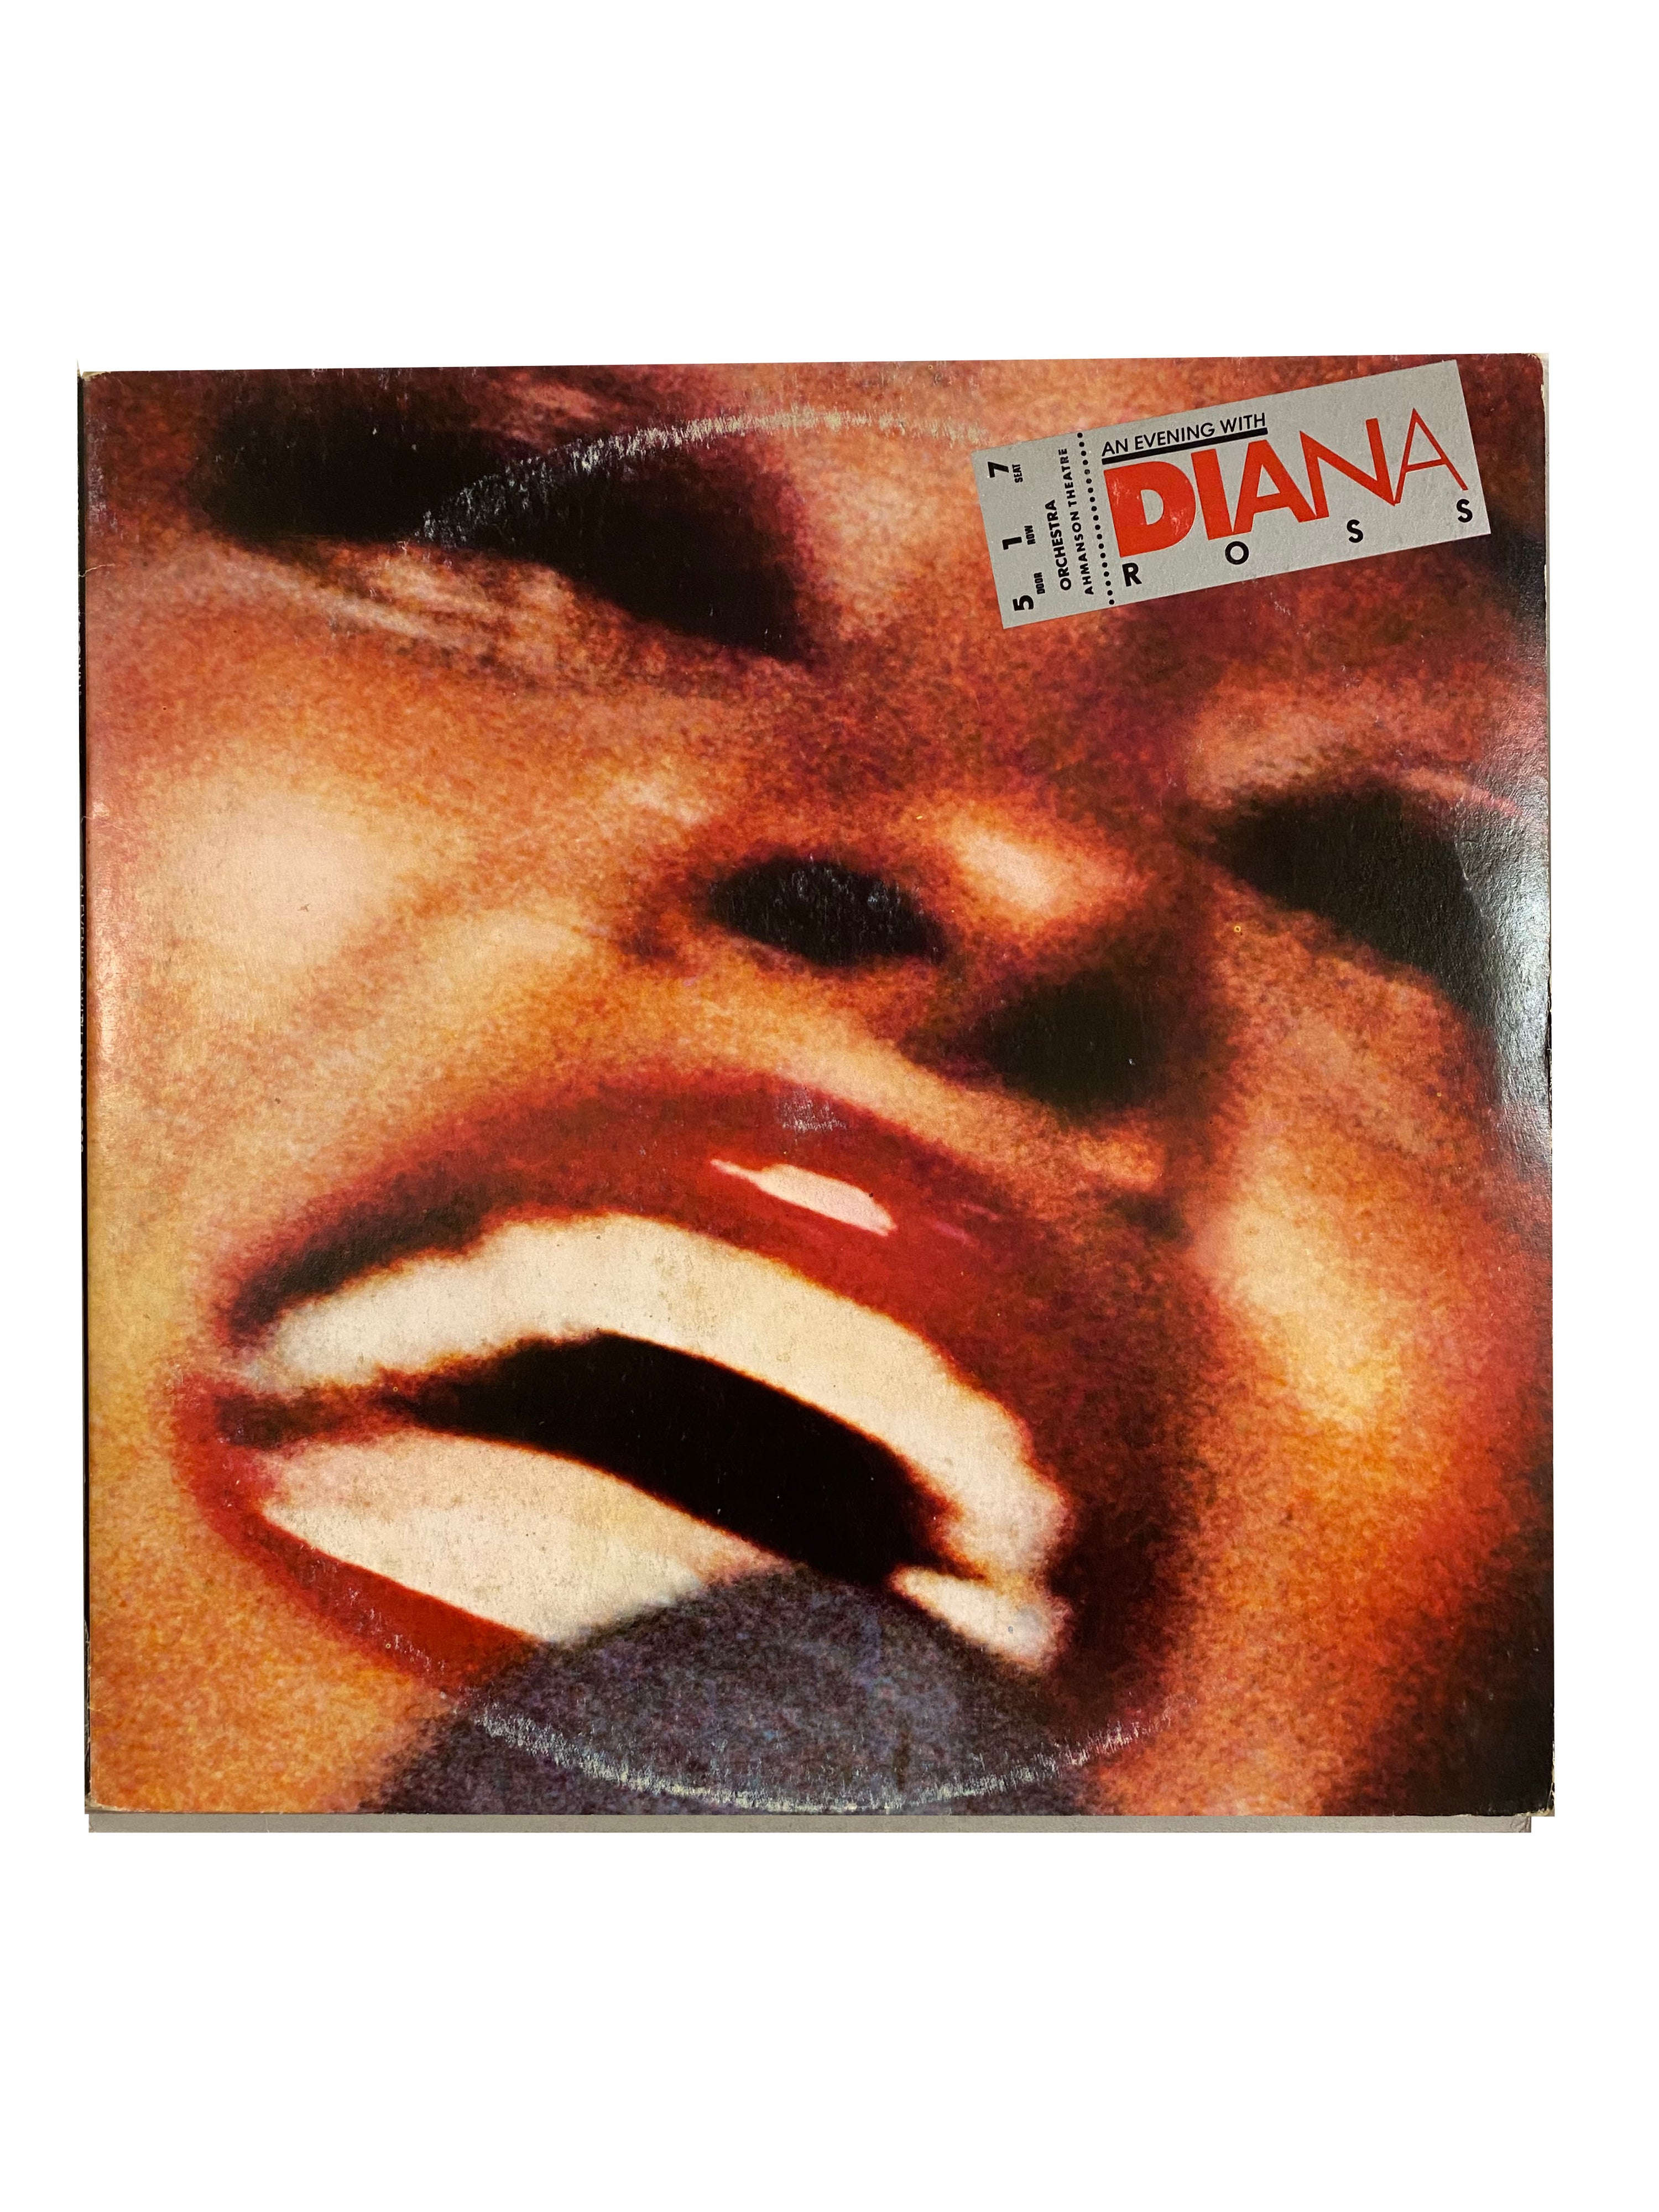 An Evening With Diana Ross (2x LP), By Diana Ross